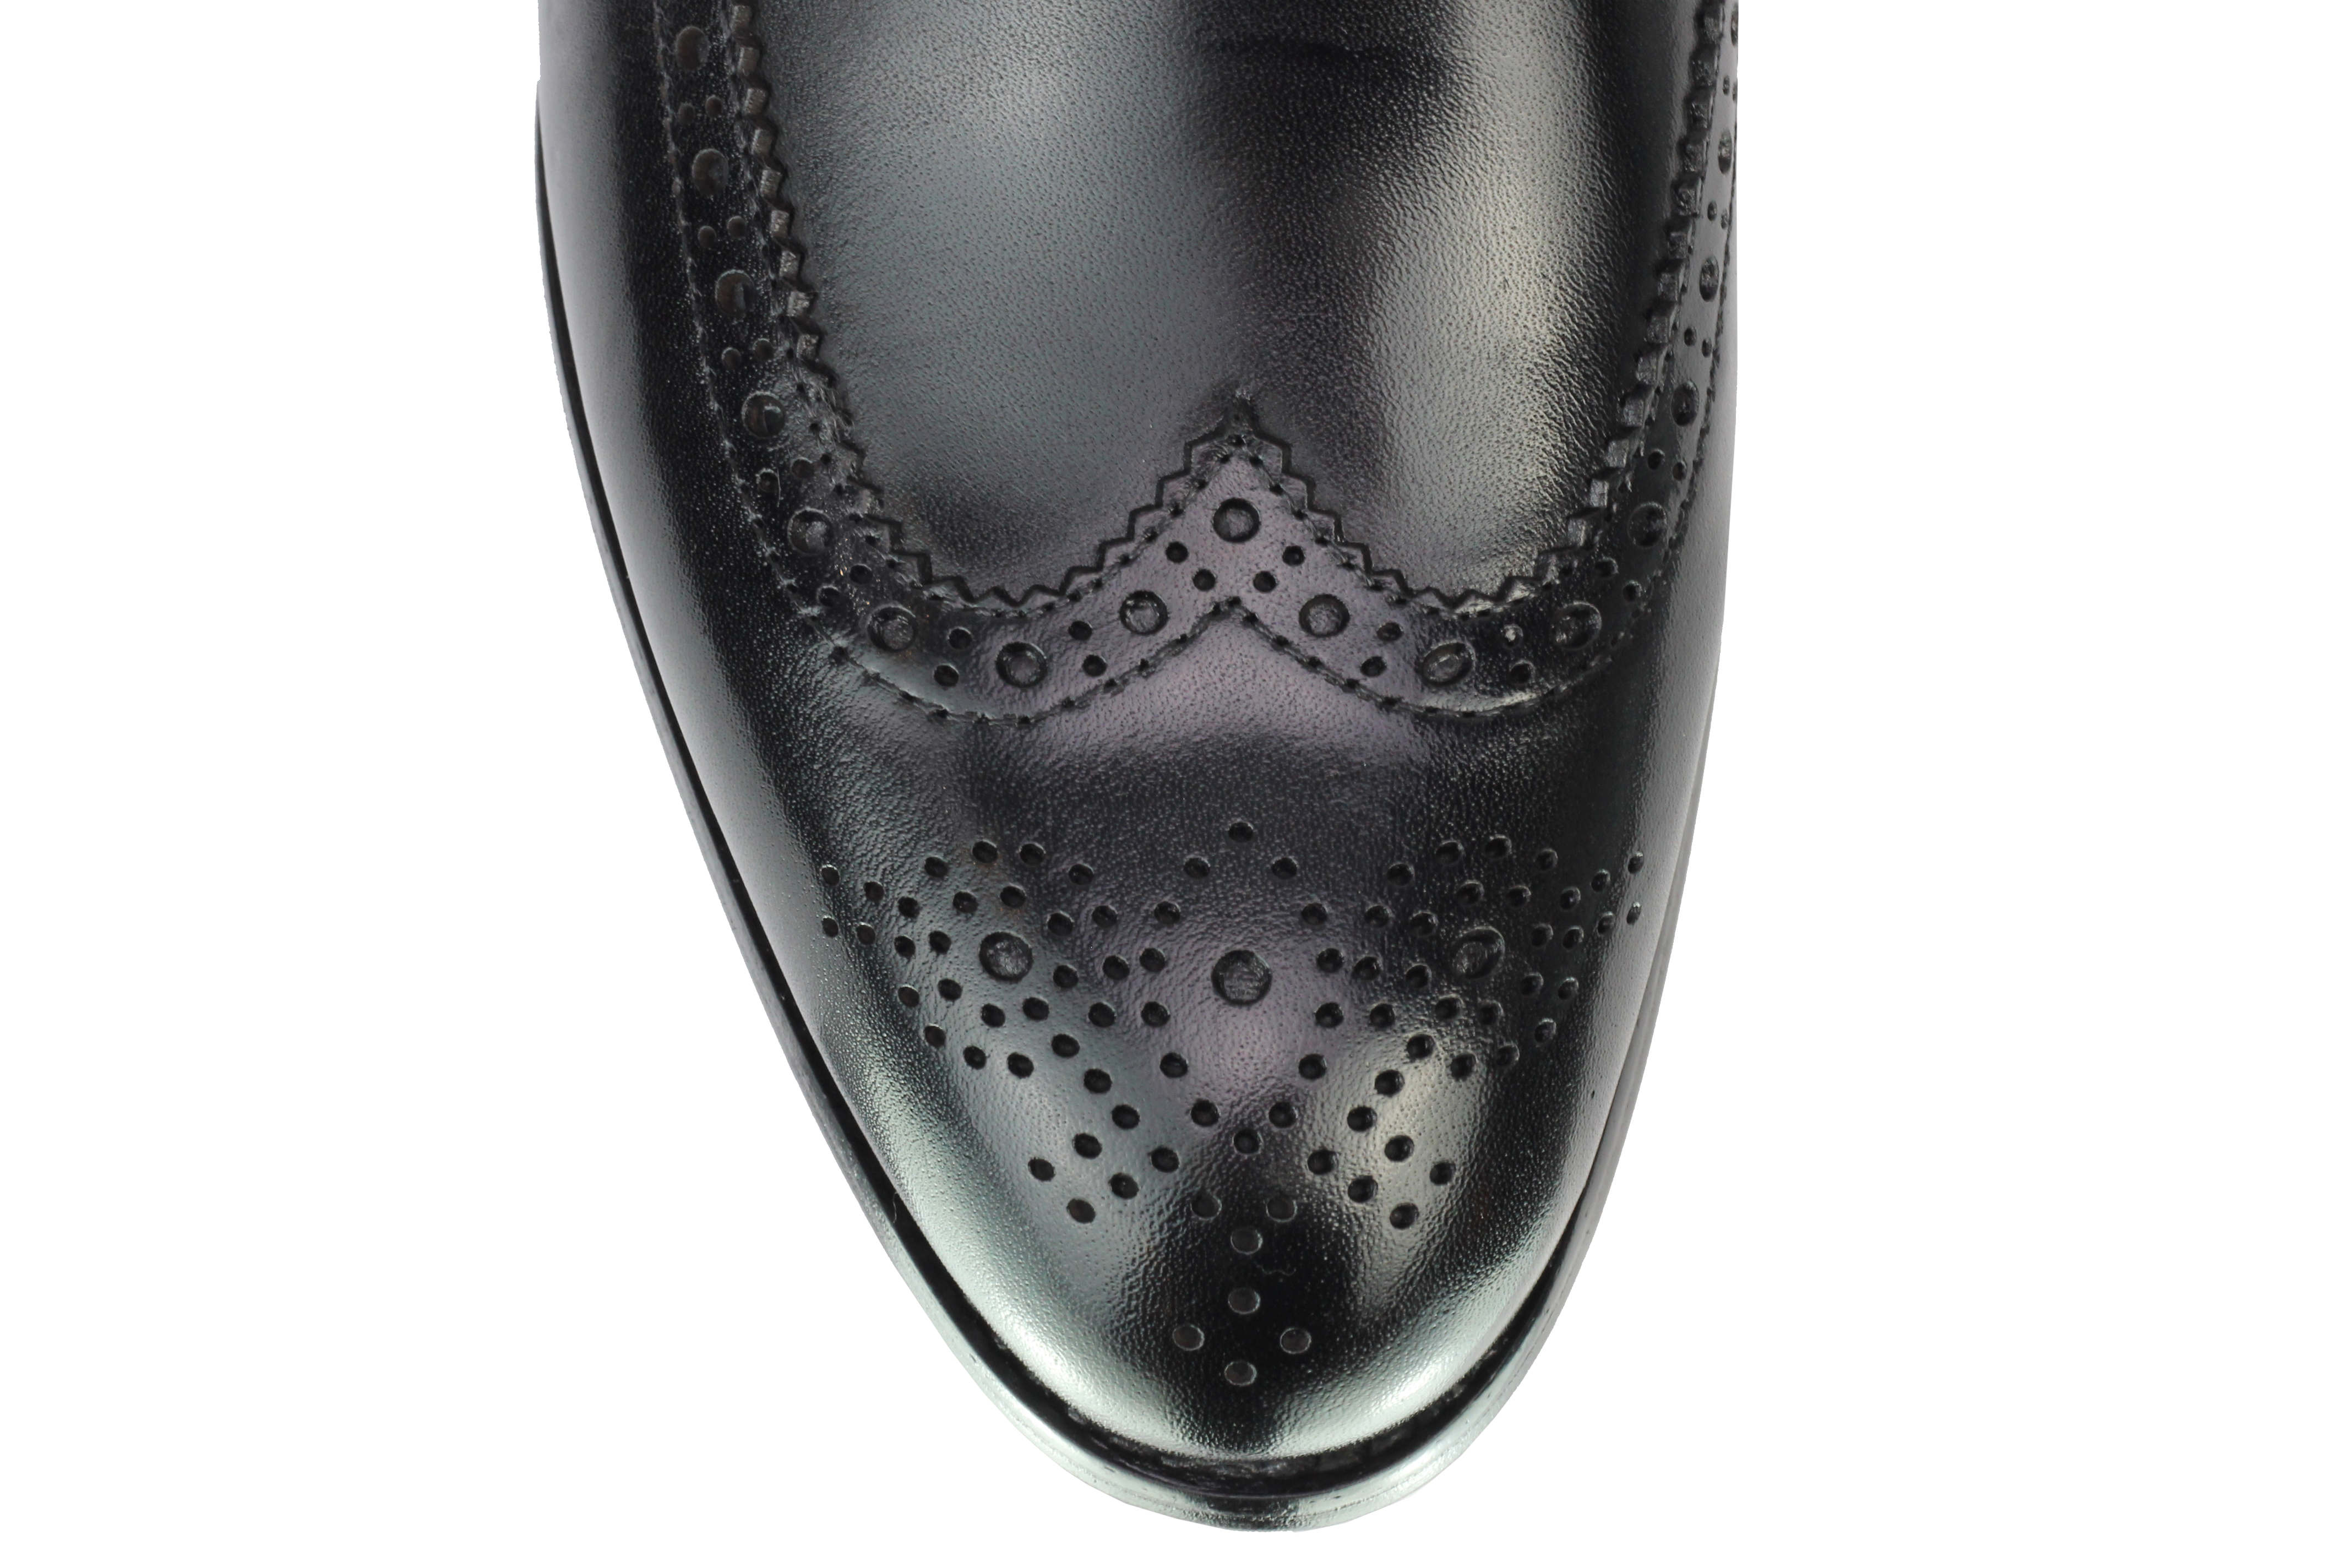 Real Leather Black Brogue Monk Shoes